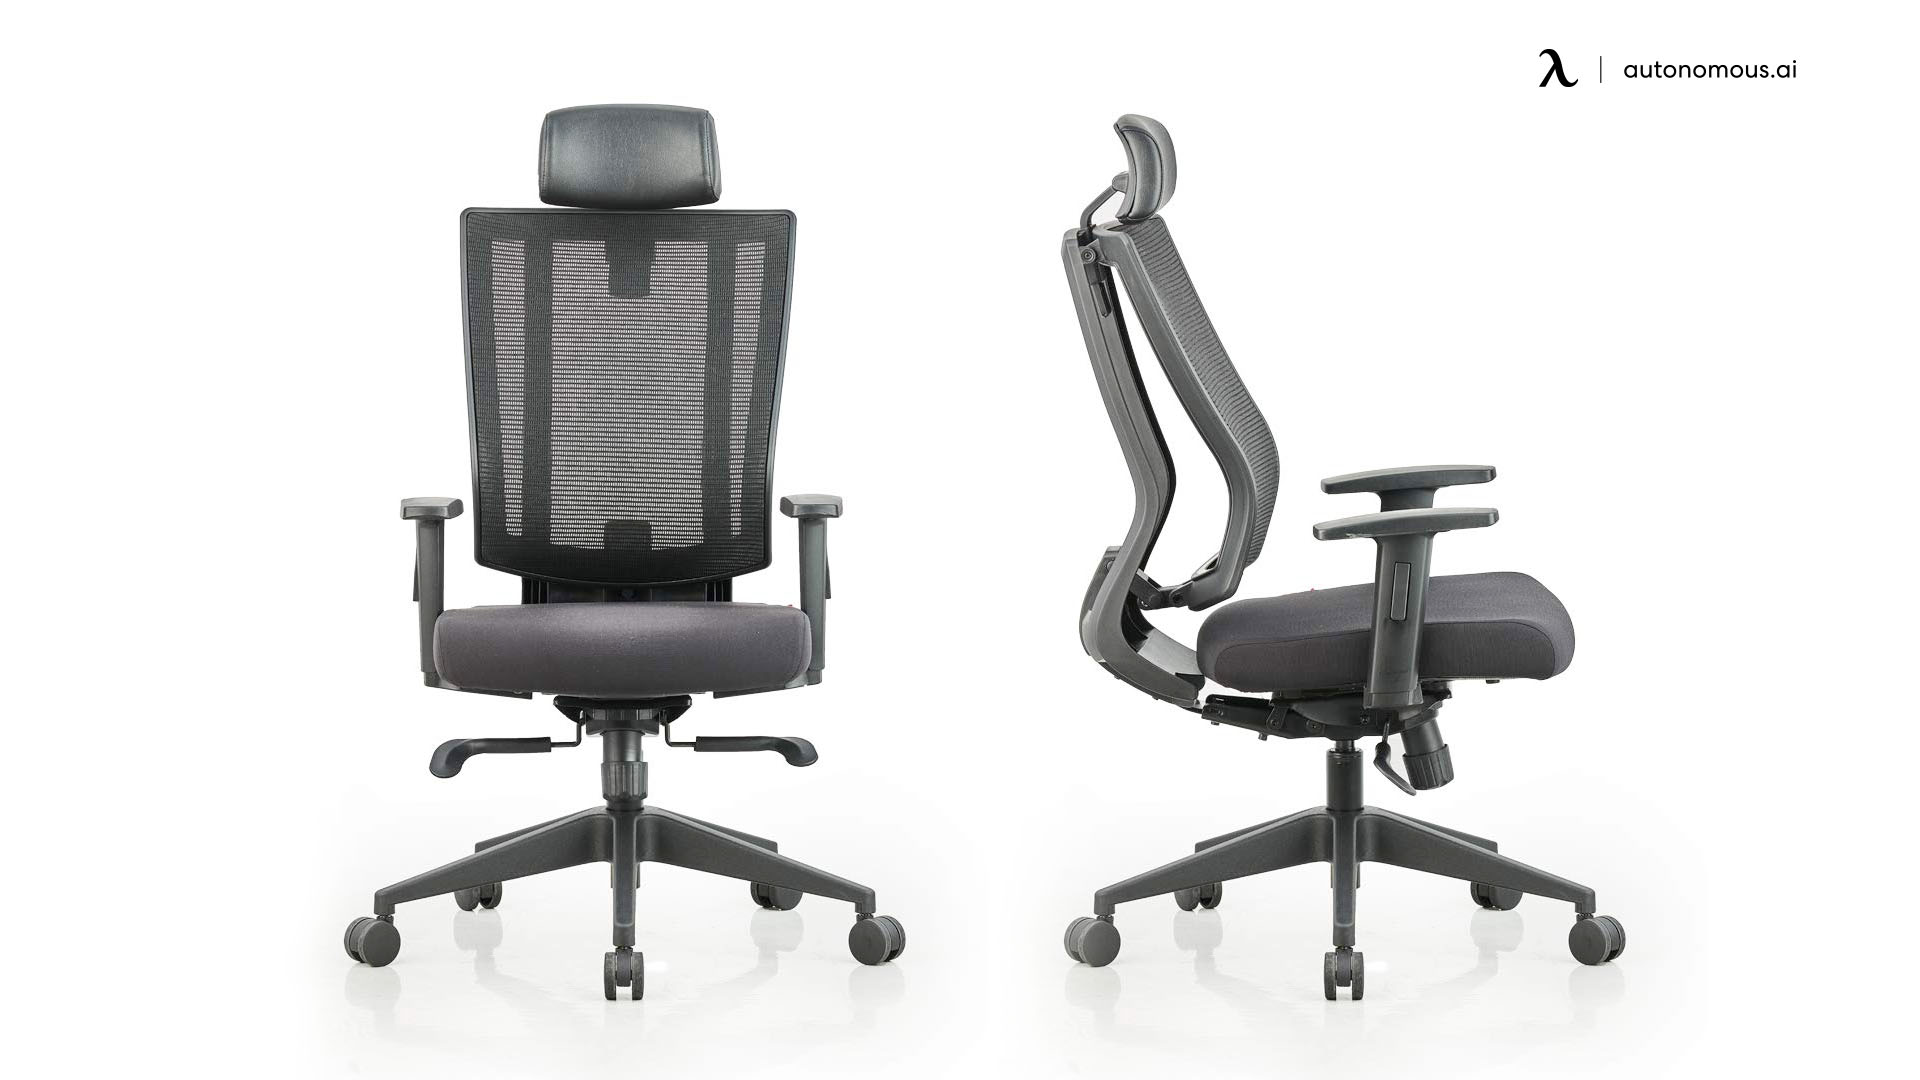 The 20 Best Ergonomic Chairs In India, Best Ergonomic Office Chair India 2021